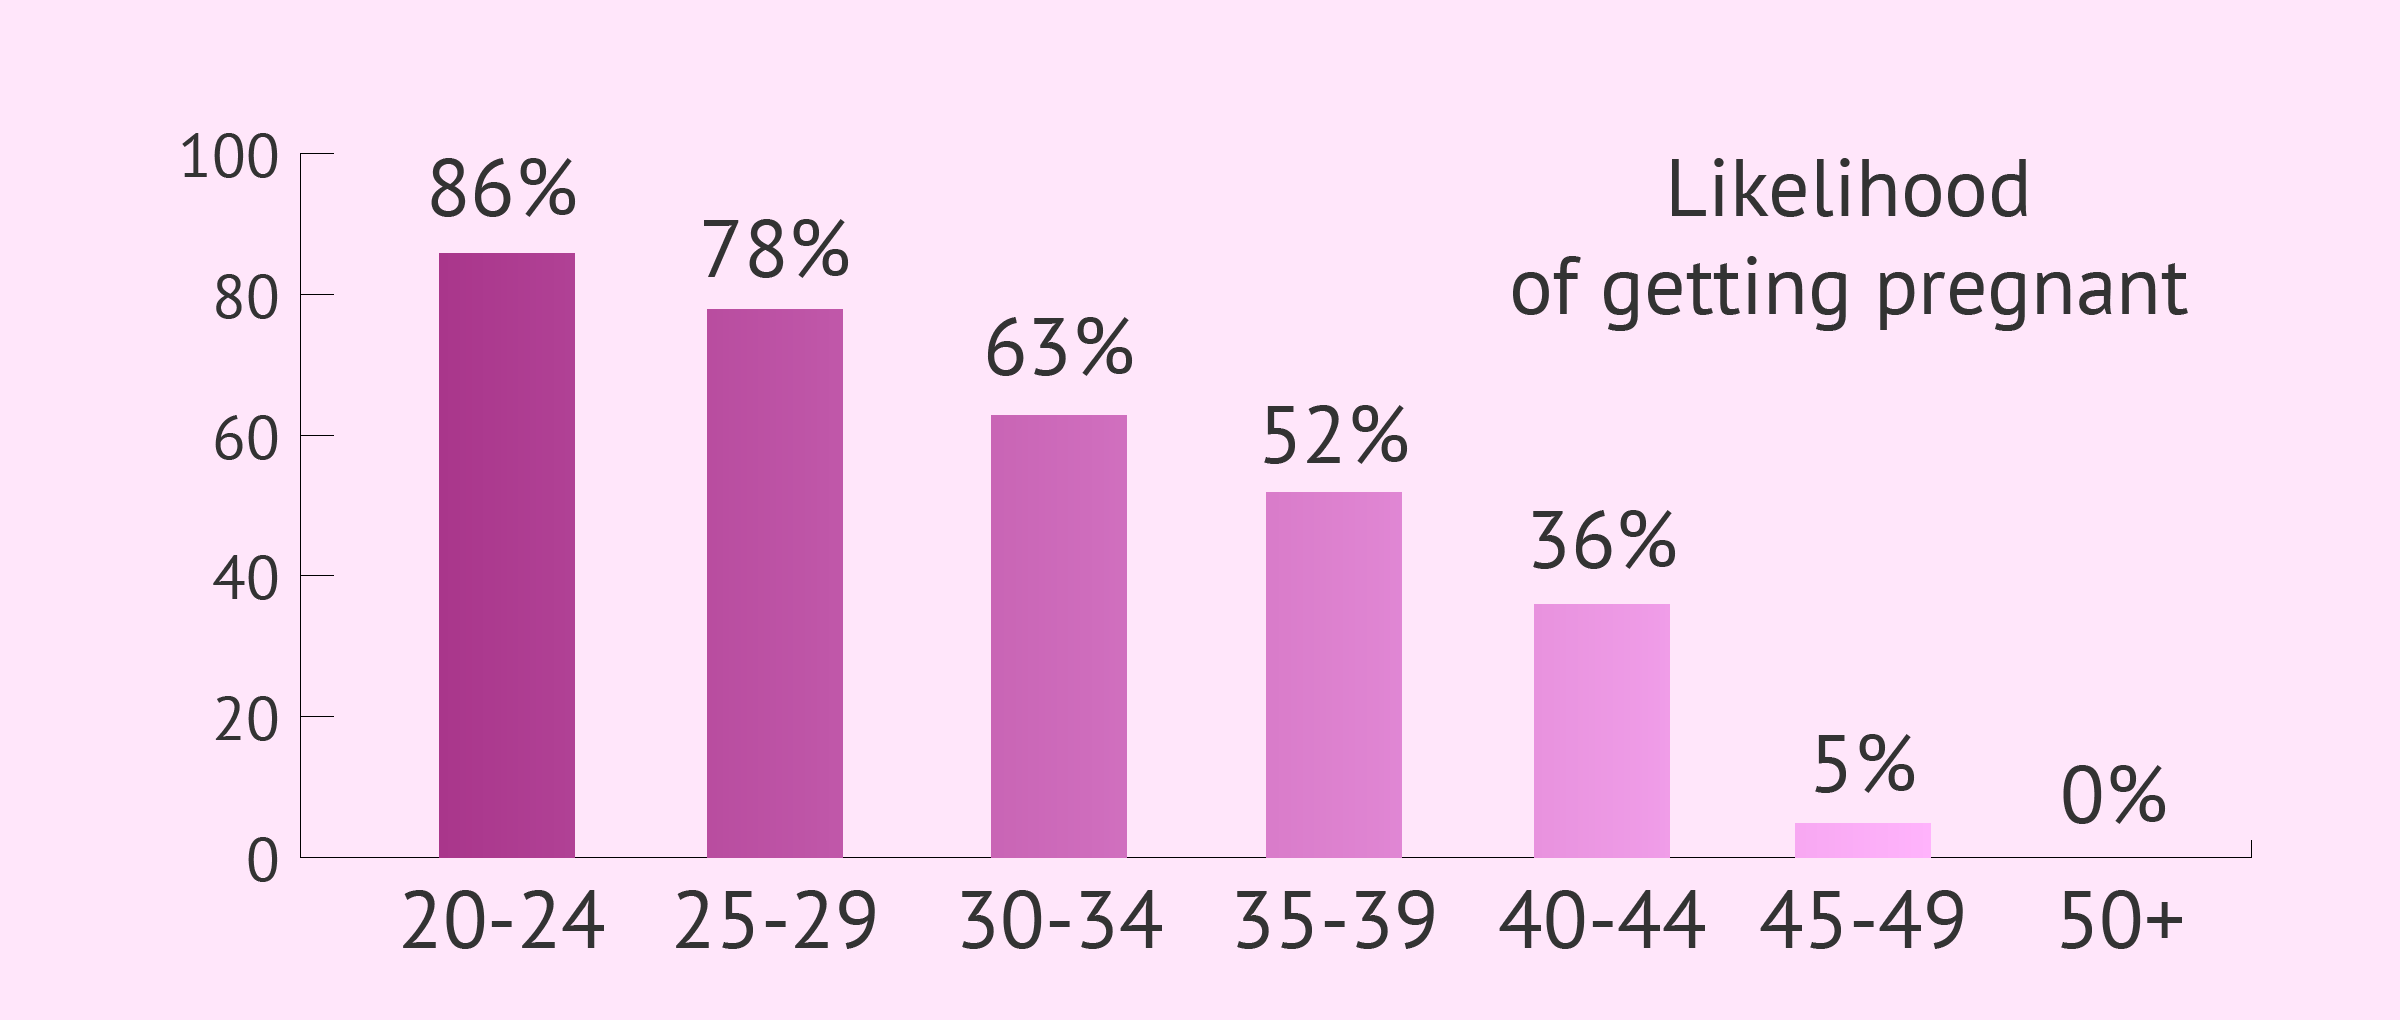 Female fertility rates by age chart